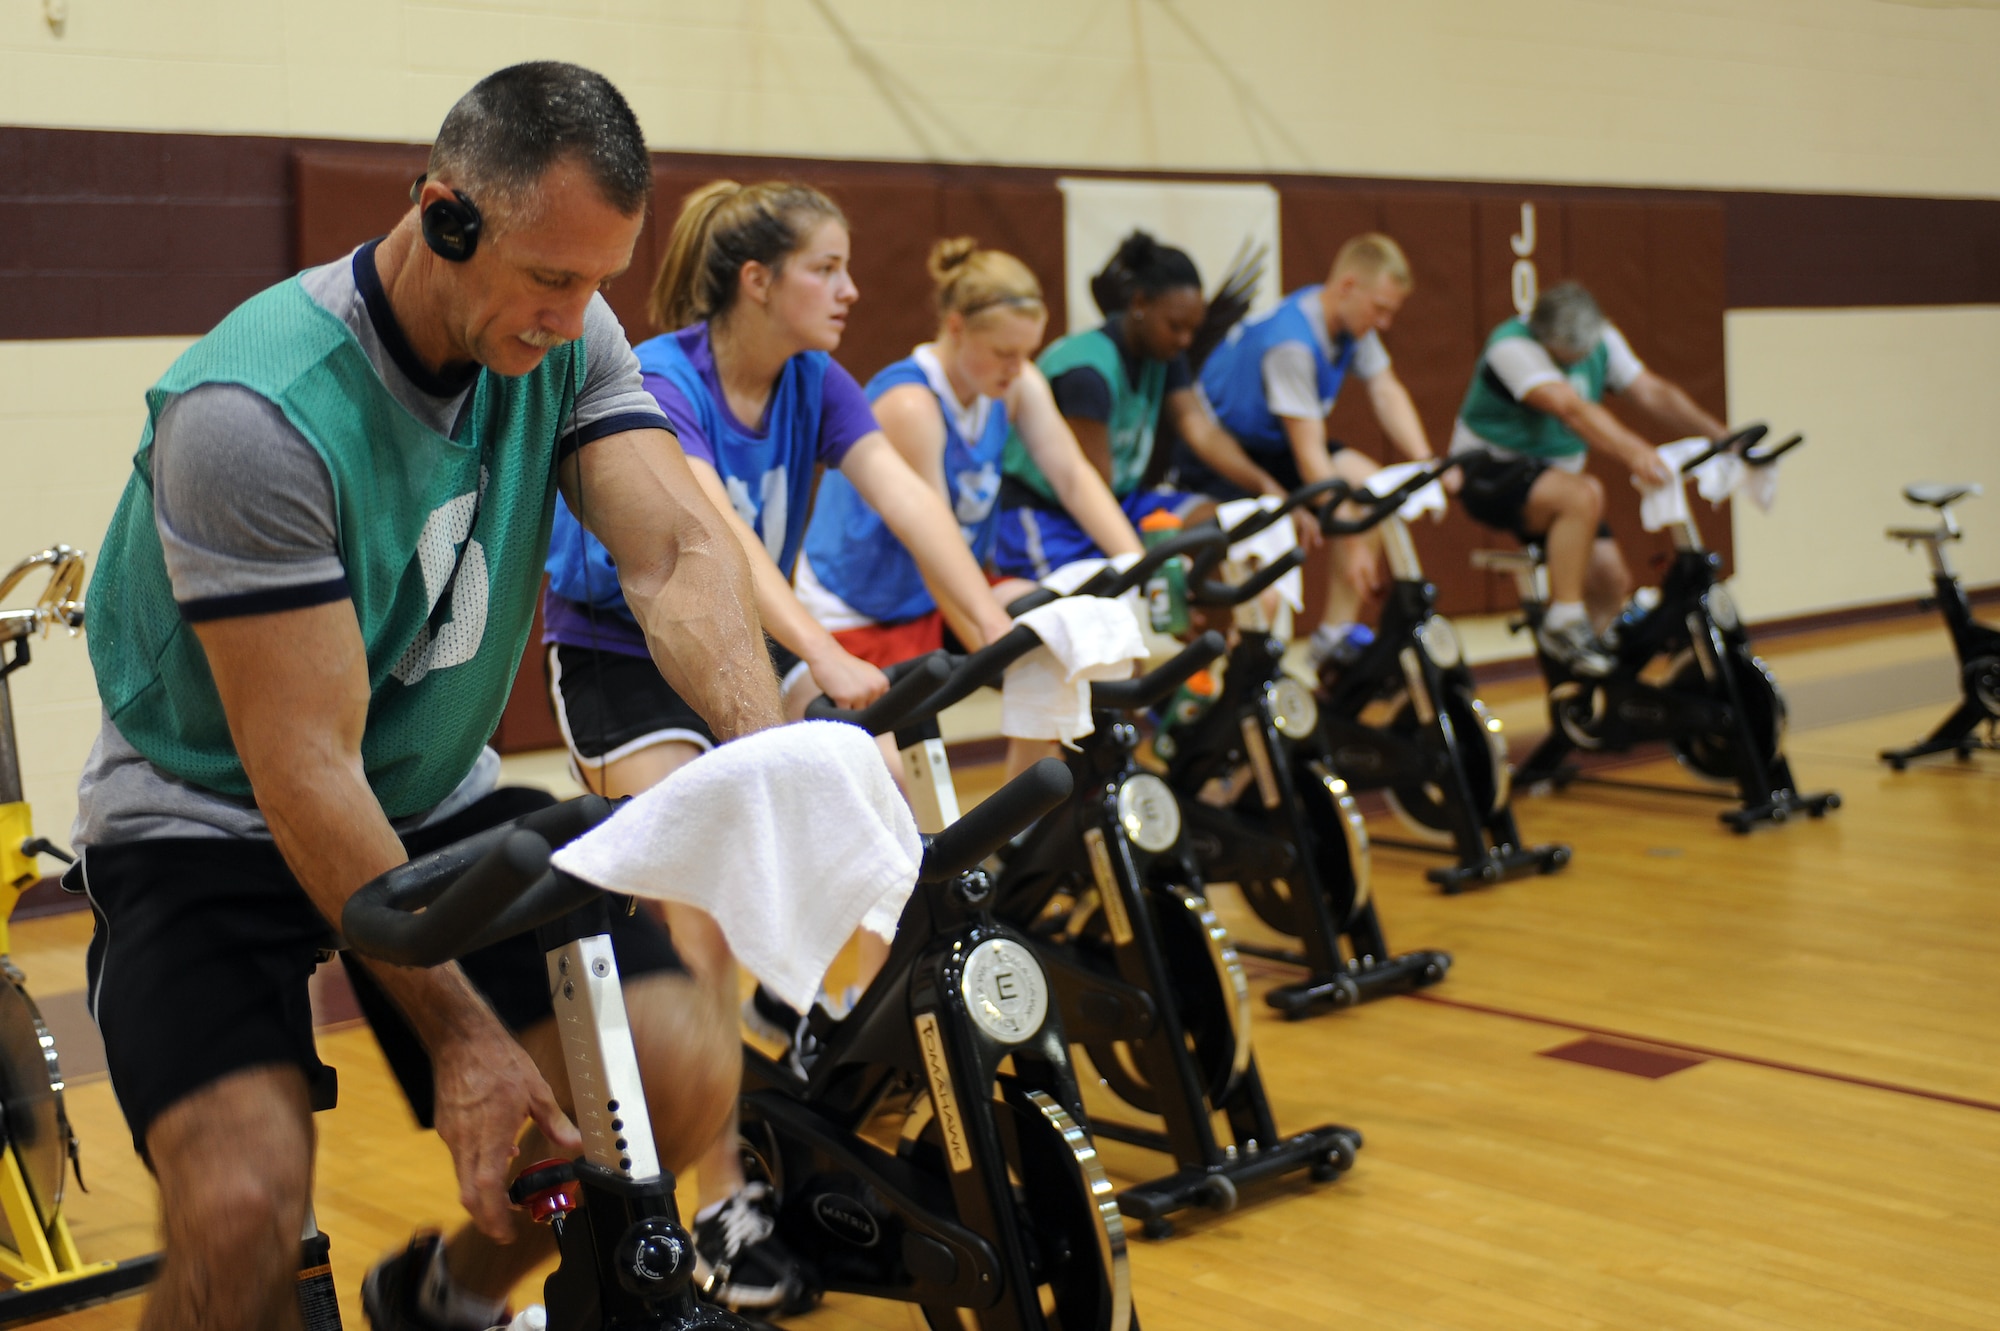 U.S. Air Force Senior Master Sgt. Timothy Moreland (left) increases resistance on a stationary bike during a boot camp challenge on Seymour Johnson Air Force Base, N.C., June 9, 2012. The event was held to test the physical limits of all who attended. Moreland, 916th Aerospace Medicine Squadron health services superintendent, is from Hollywood, Fla. (U.S. Air Force photo/Airman 1st Class John Nieves Camacho/Released)